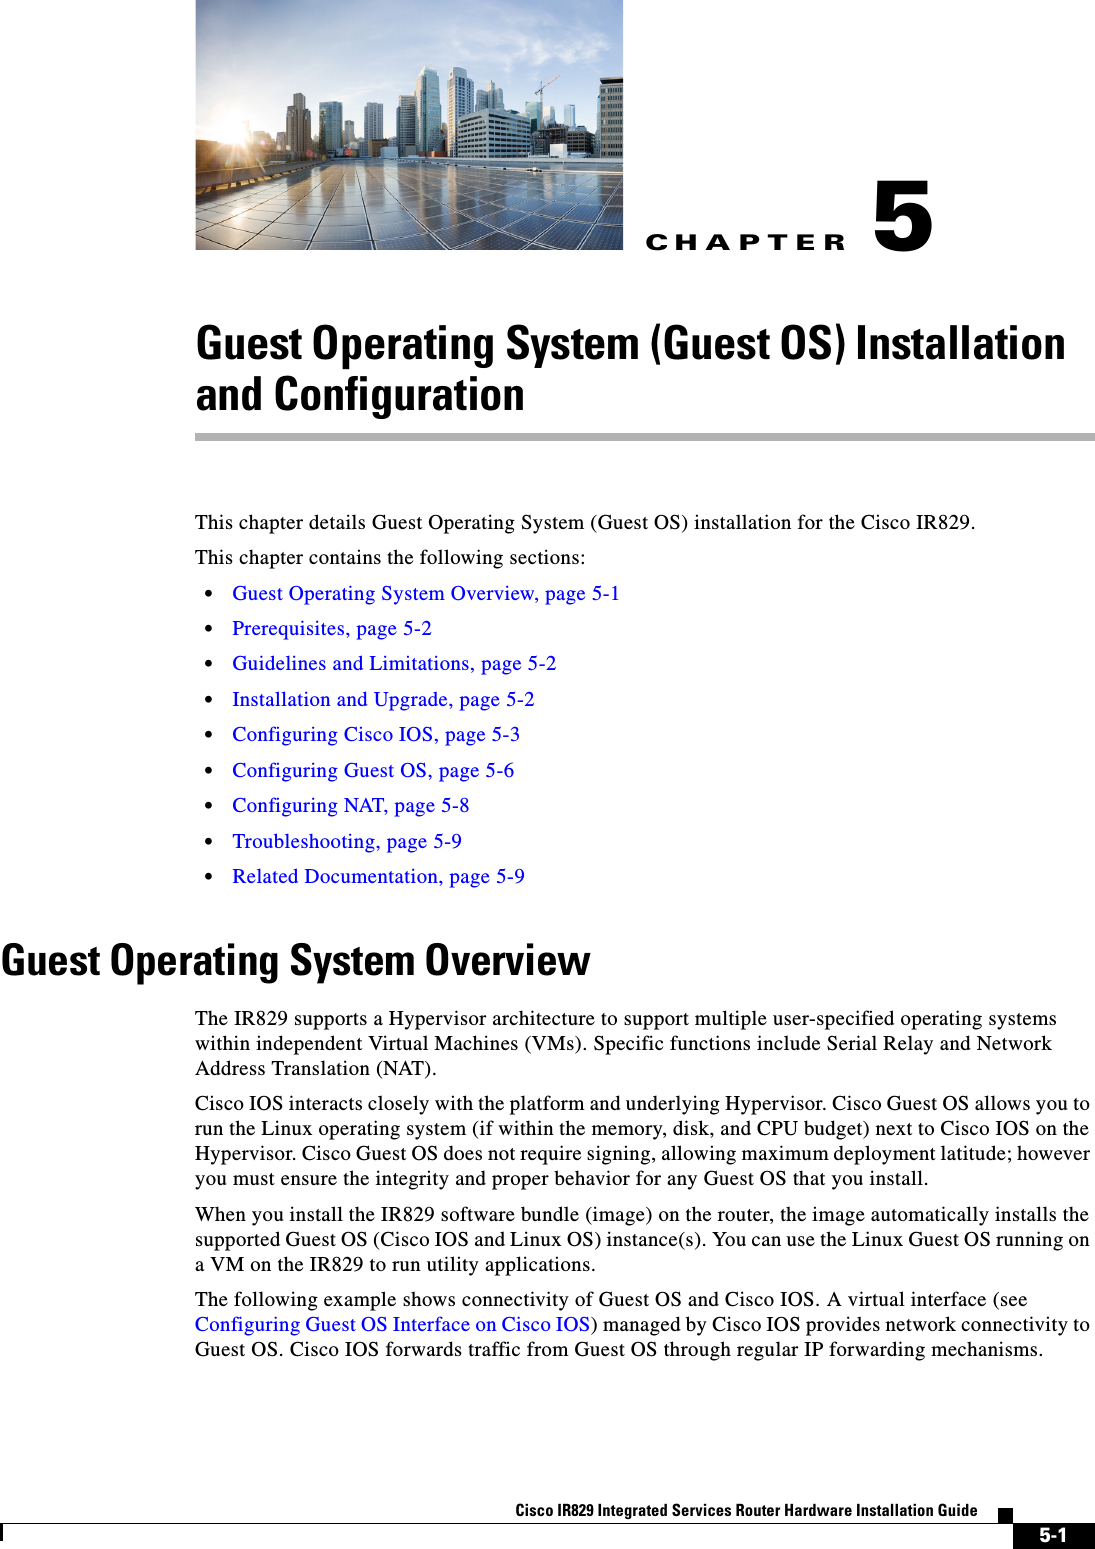 CHAPTER5-1Cisco IR829 Integrated Services Router Hardware Installation Guide5Guest Operating System (Guest OS) Installation and ConfigurationThis chapter details Guest Operating System (Guest OS) installation for the Cisco IR829.This chapter contains the following sections: • Guest Operating System Overview, page 5-1 • Prerequisites, page 5-2 • Guidelines and Limitations, page 5-2 • Installation and Upgrade, page 5-2 • Configuring Cisco IOS, page 5-3 • Configuring Guest OS, page 5-6 • Configuring NAT, page 5-8 • Troubleshooting, page 5-9 • Related Documentation, page 5-9Guest Operating System OverviewThe IR829 supports a Hypervisor architecture to support multiple user-specified operating systems within independent Virtual Machines (VMs). Specific functions include Serial Relay and Network Address Translation (NAT).Cisco IOS interacts closely with the platform and underlying Hypervisor. Cisco Guest OS allows you to run the Linux operating system (if within the memory, disk, and CPU budget) next to Cisco IOS on the Hypervisor. Cisco Guest OS does not require signing, allowing maximum deployment latitude; however you must ensure the integrity and proper behavior for any Guest OS that you install. When you install the IR829 software bundle (image) on the router, the image automatically installs the supported Guest OS (Cisco IOS and Linux OS) instance(s). You can use the Linux Guest OS running on a VM on the IR829 to run utility applications.The following example shows connectivity of Guest OS and Cisco IOS. A virtual interface (see Configuring Guest OS Interface on Cisco IOS) managed by Cisco IOS provides network connectivity to Guest OS. Cisco IOS forwards traffic from Guest OS through regular IP forwarding mechanisms.